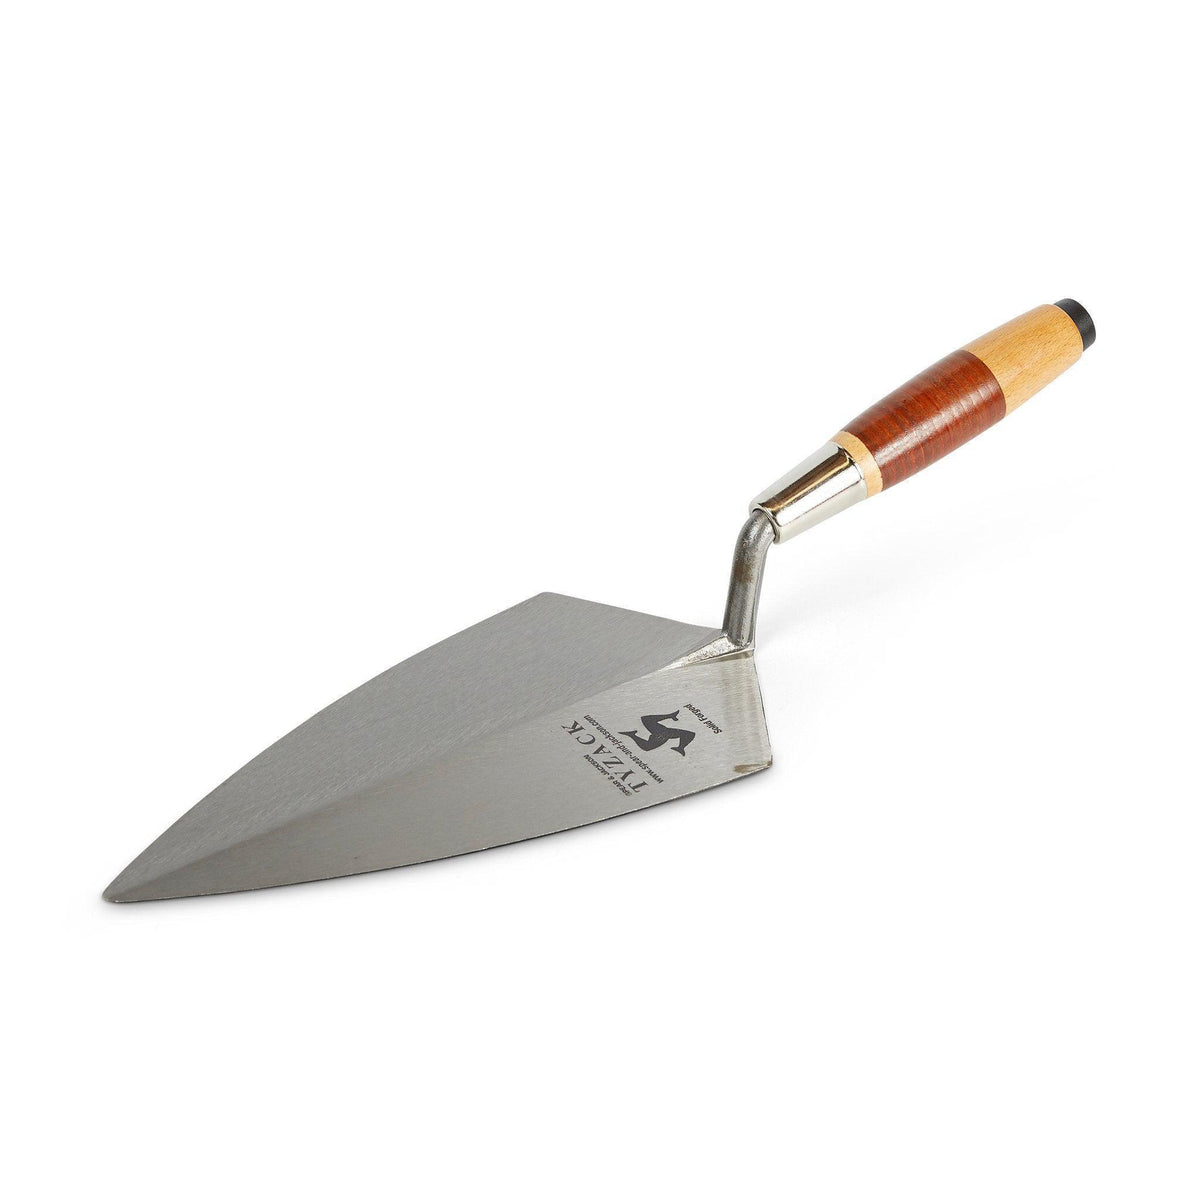 Tyzack Trowel - 11 Philadelphia Pattern Leather Handle Bricklaying Tools & Essentials